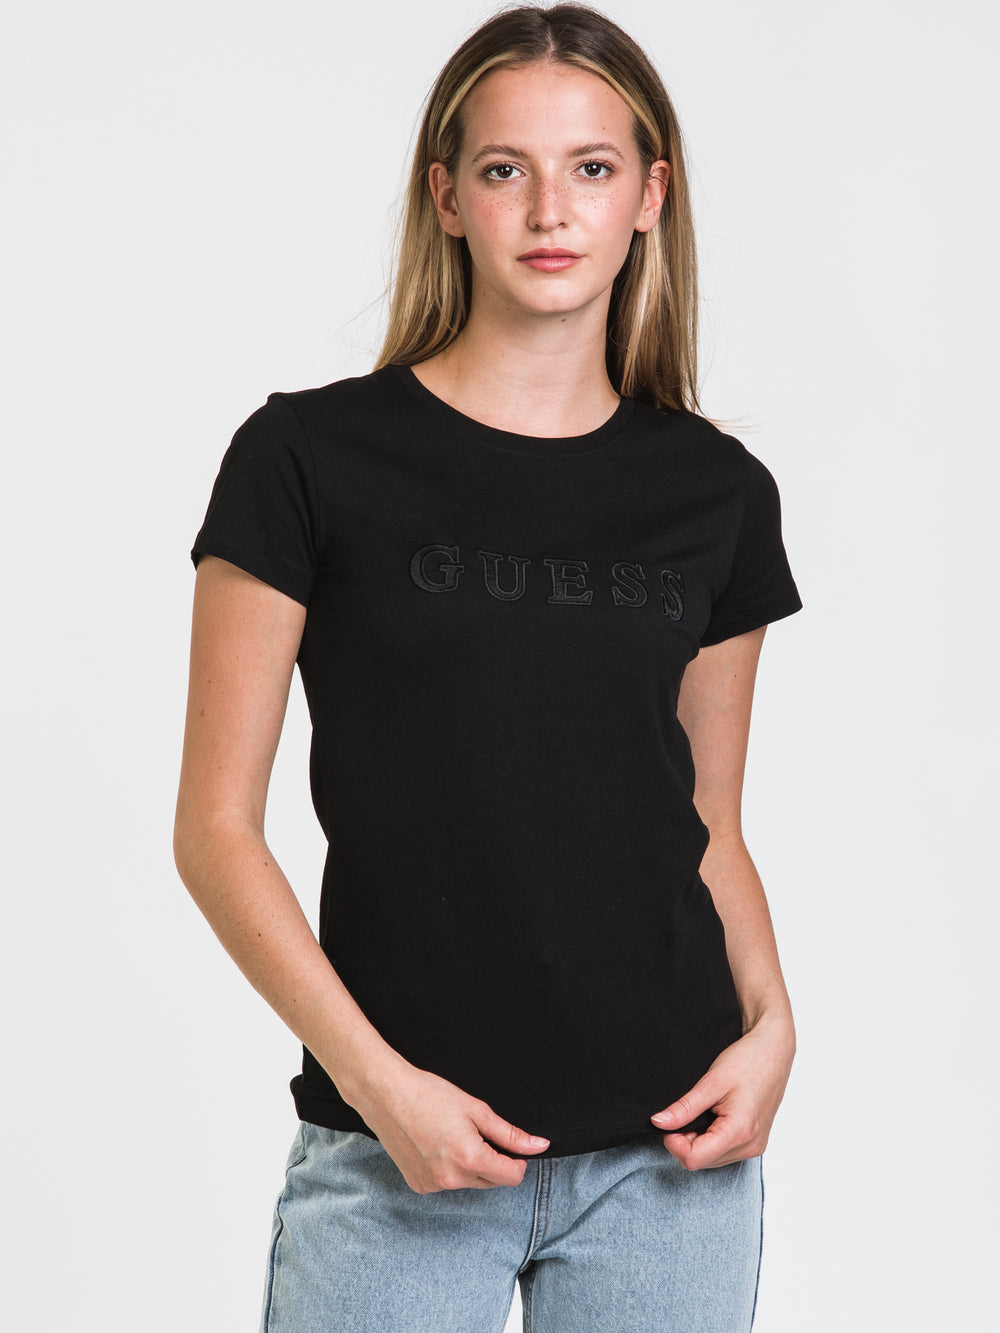 T-SHIRT GUESS AMICE - DÉSTOCKAGE